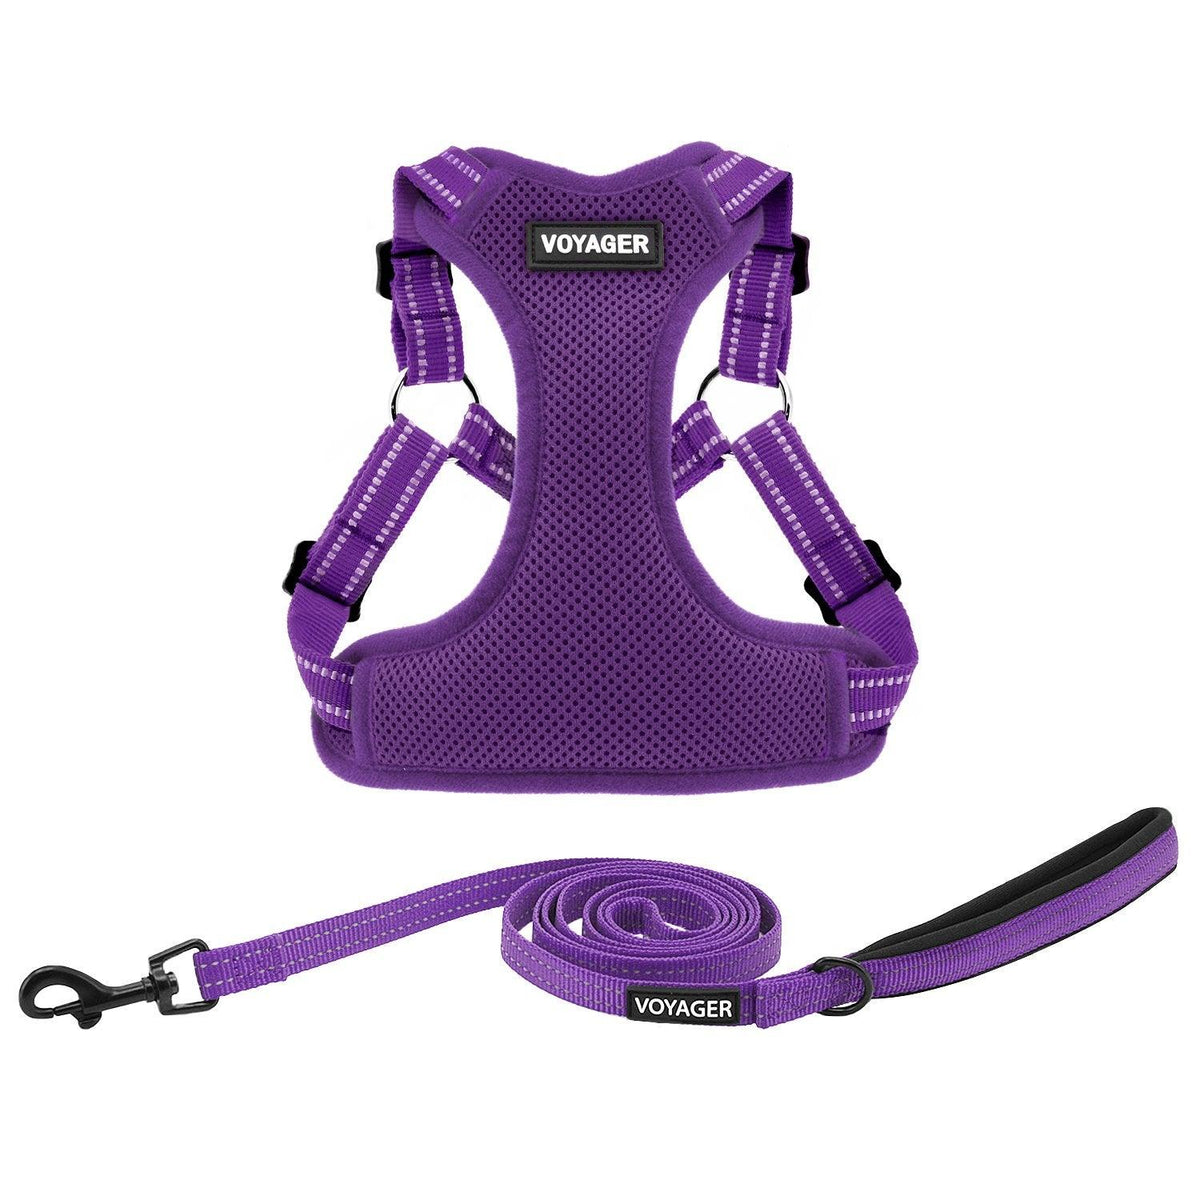 Step-In Flex Harness & Leash Combo Set - VOYAGER Dog Harnesses